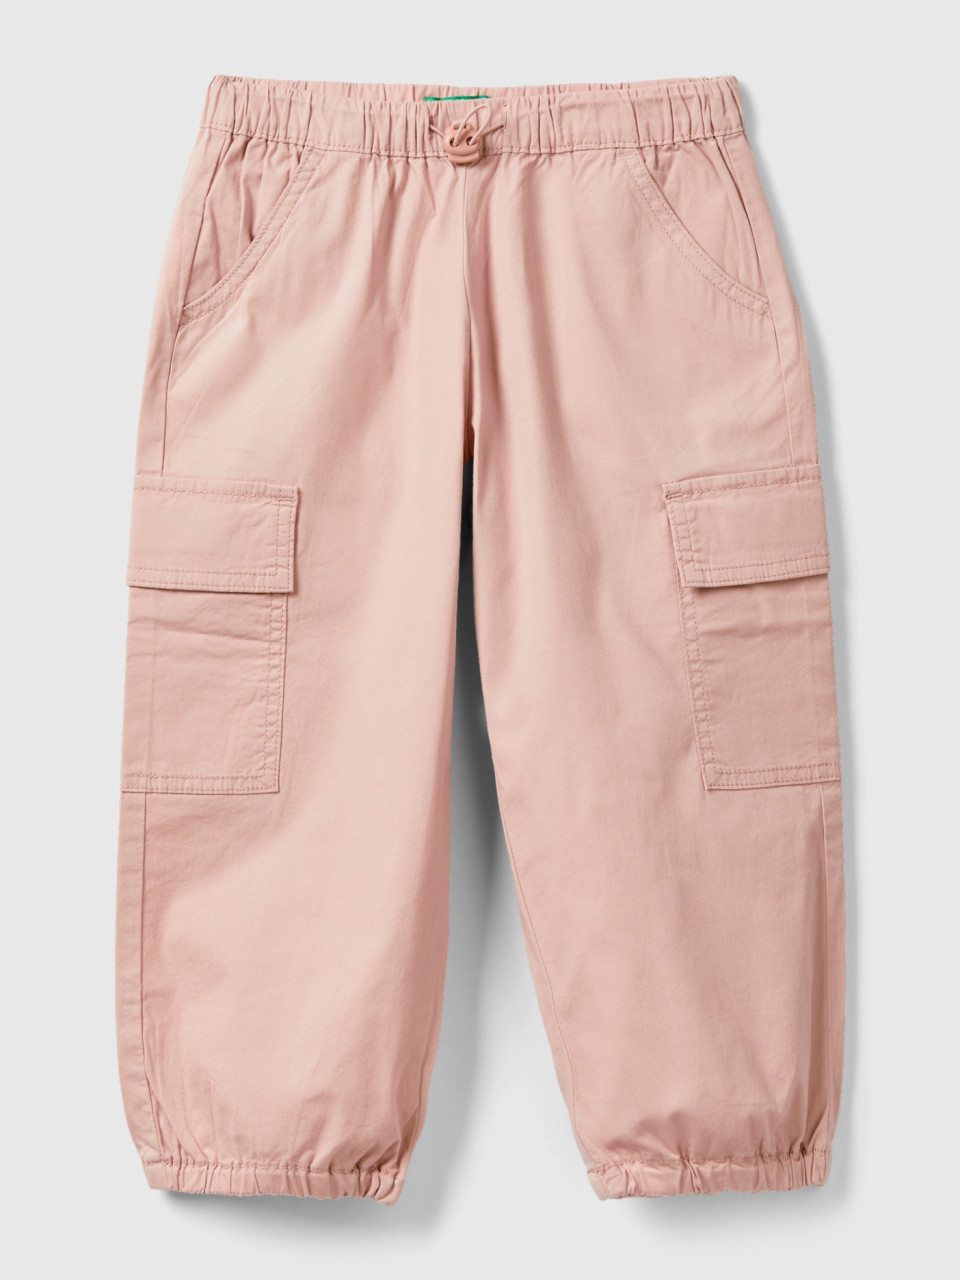 Benetton, Stretch Cotton Cargo Trousers, Soft Pink, Kids